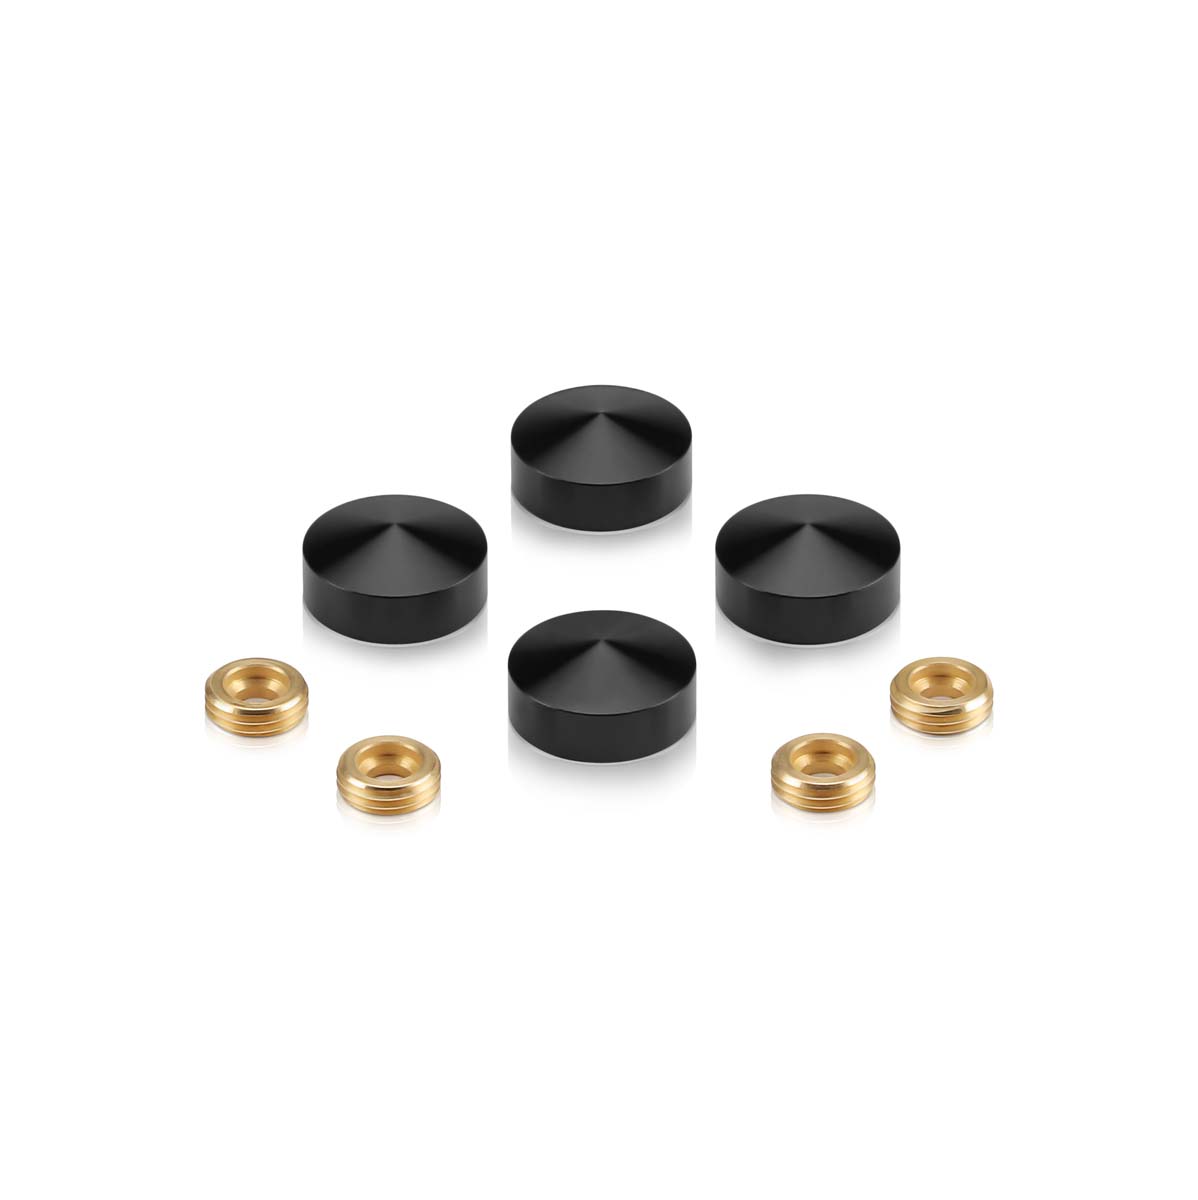 Set of 4 Conical Screw Cover, Diameter: 11/16'' (Less 3/4''), Aluminum Black Anodized Finish (Indoor or Outdoor Use)